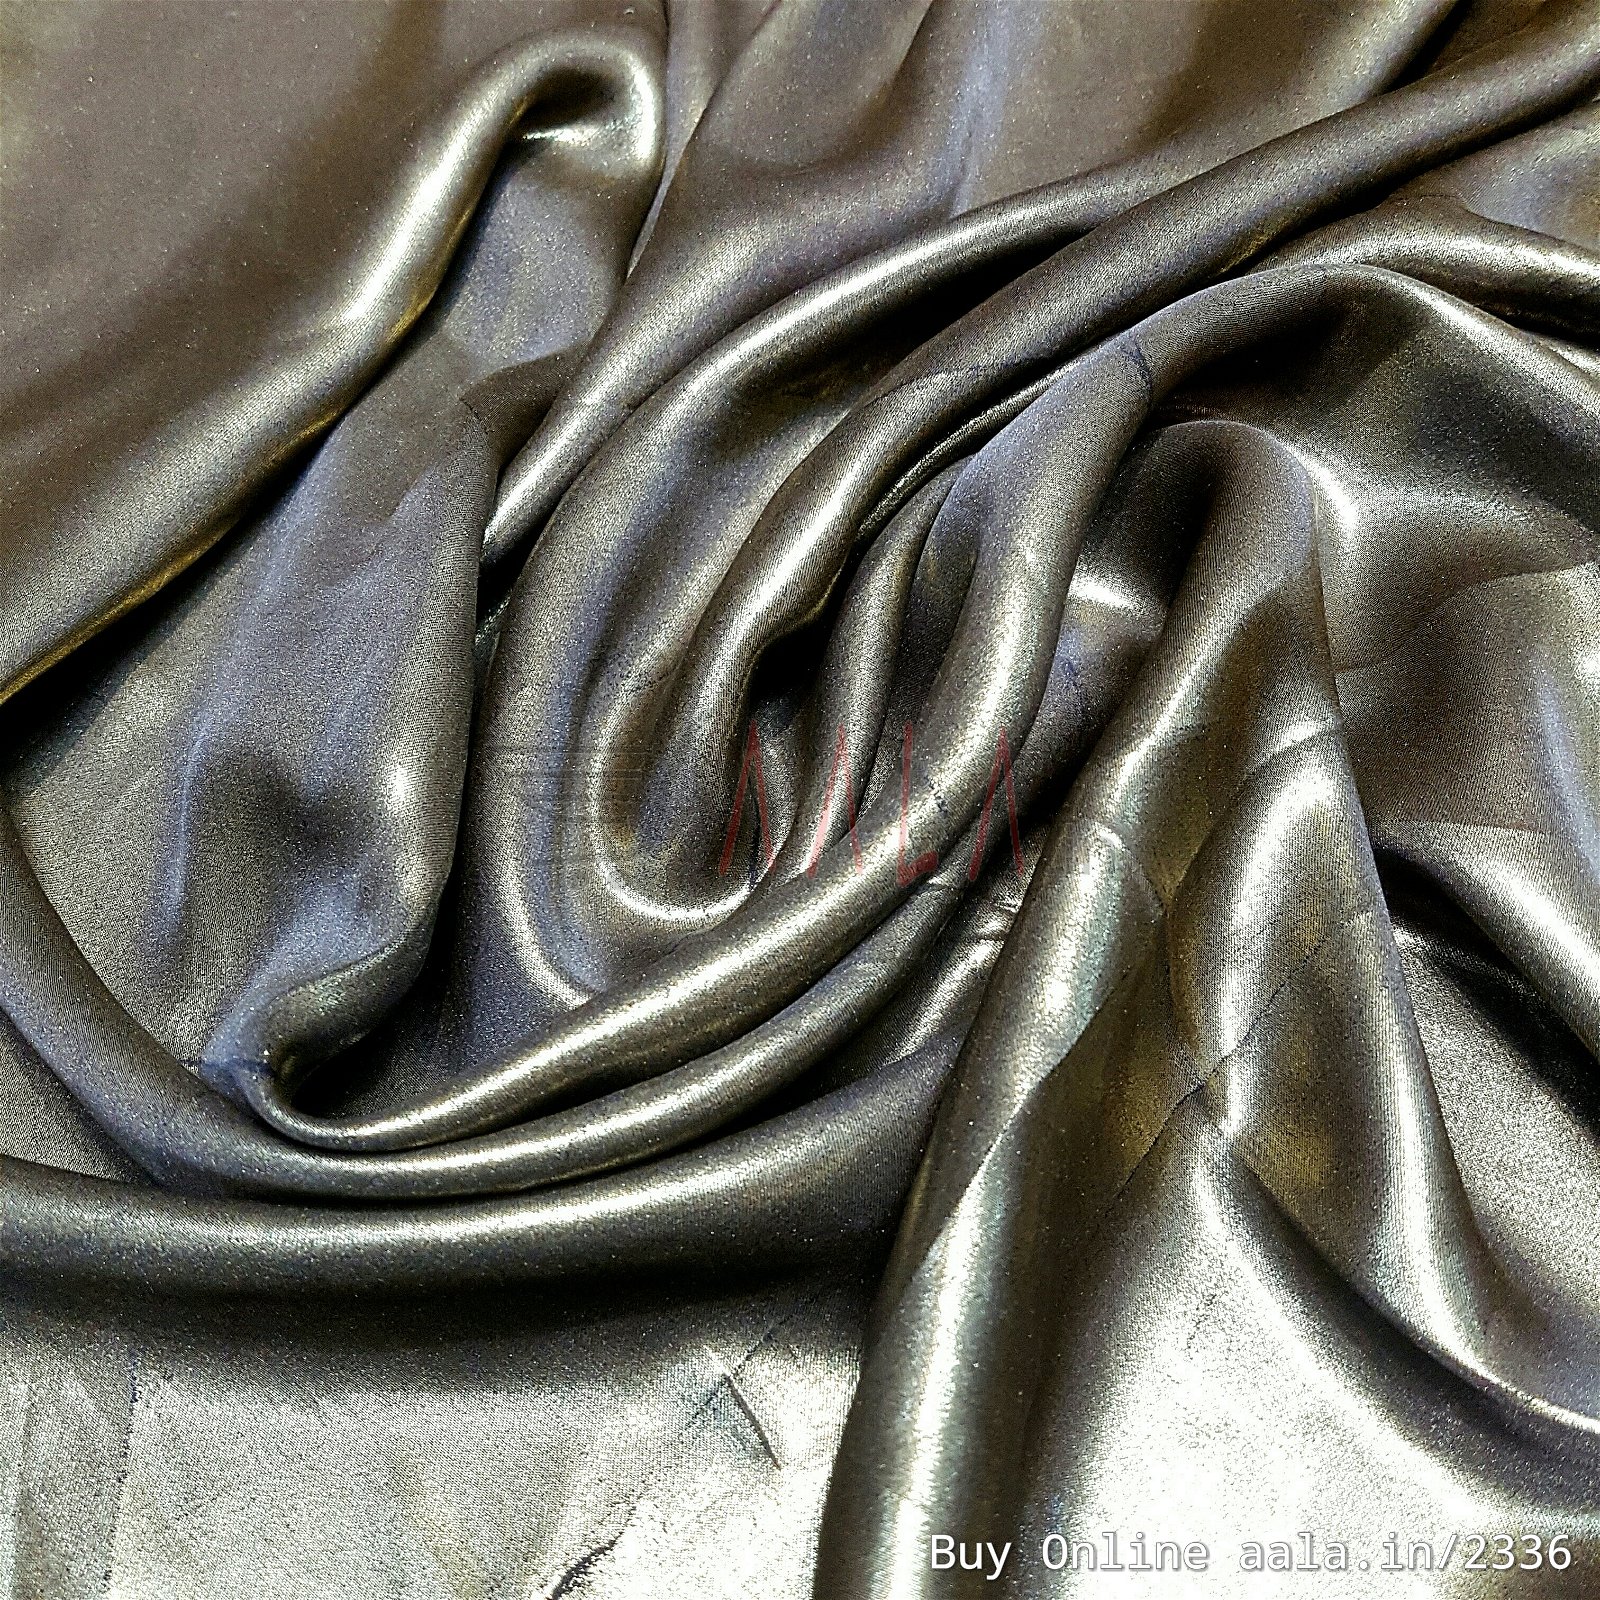 Half Coating Satin Georgette Poly-ester 44 Inches Dyed Per Metre #2336